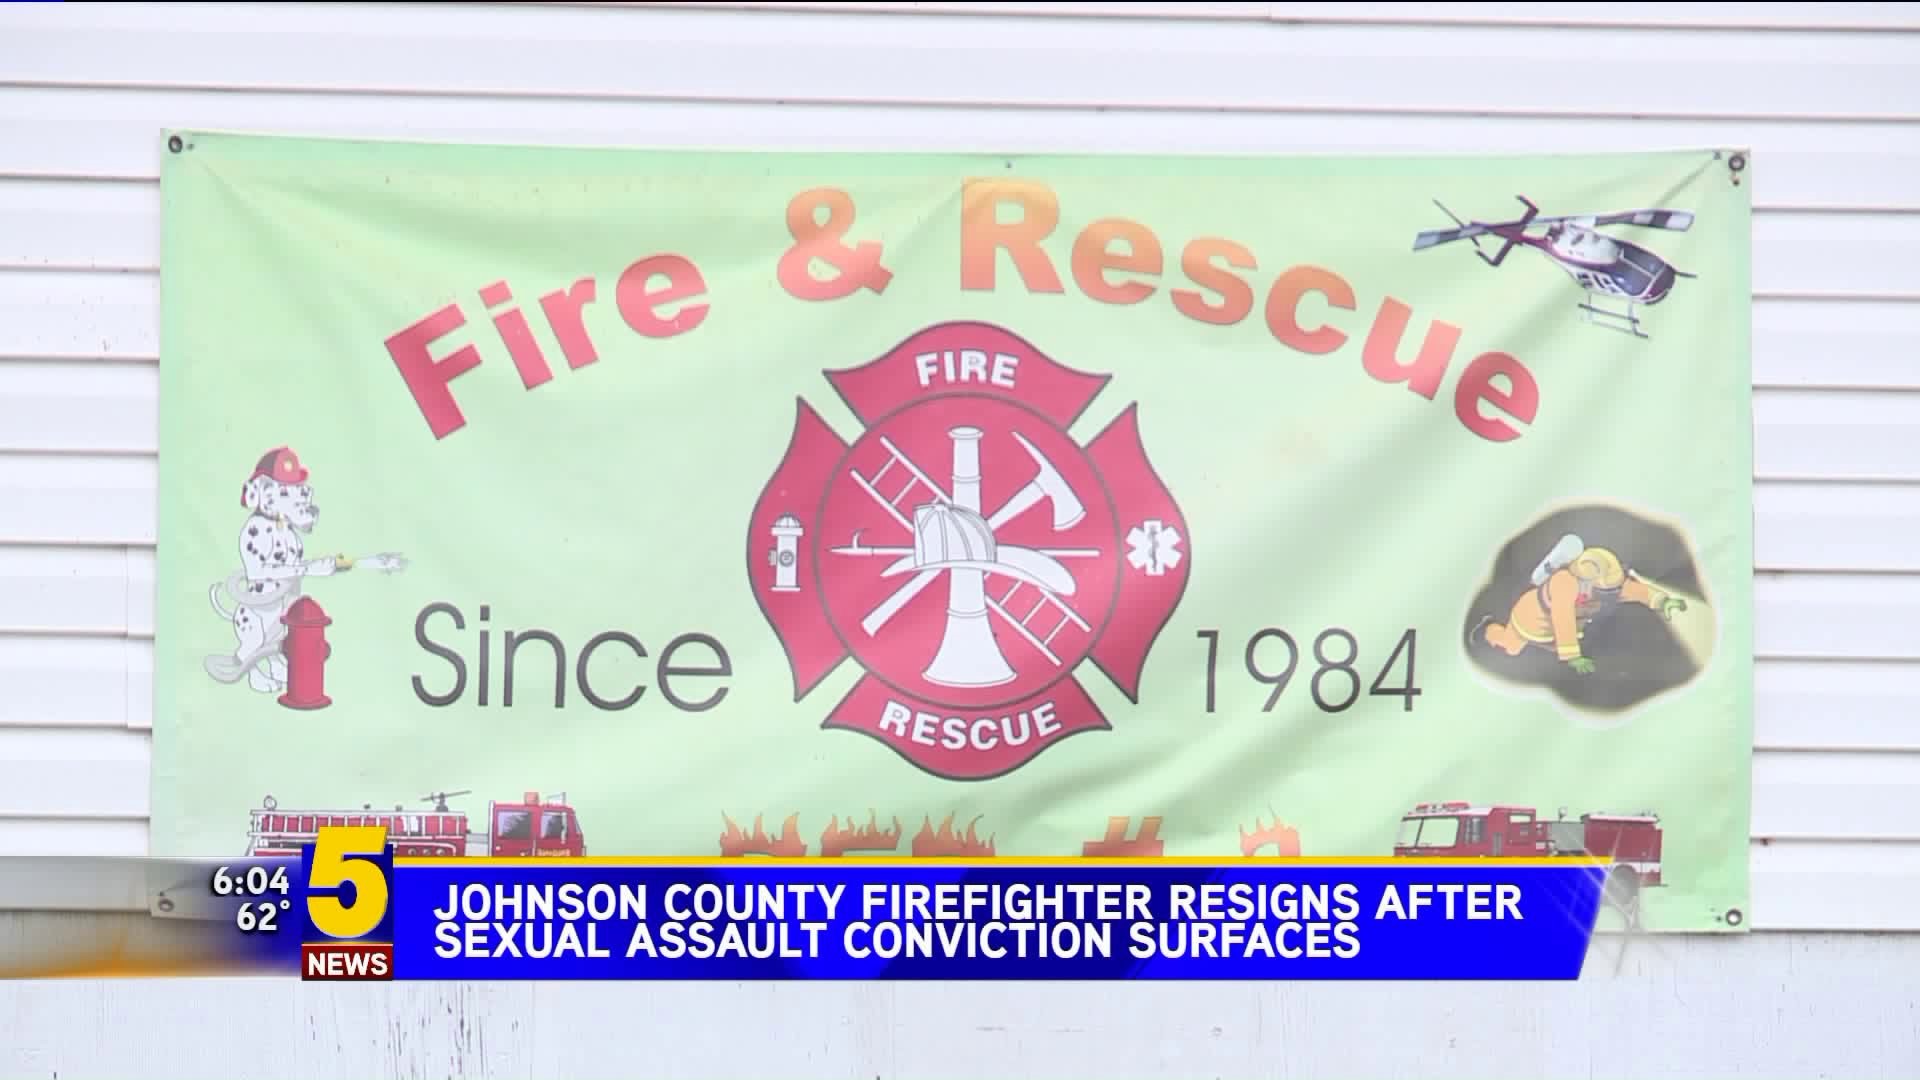 Johnson County Firefighter Resigns After Sexual Assualt Conviction Surfaces